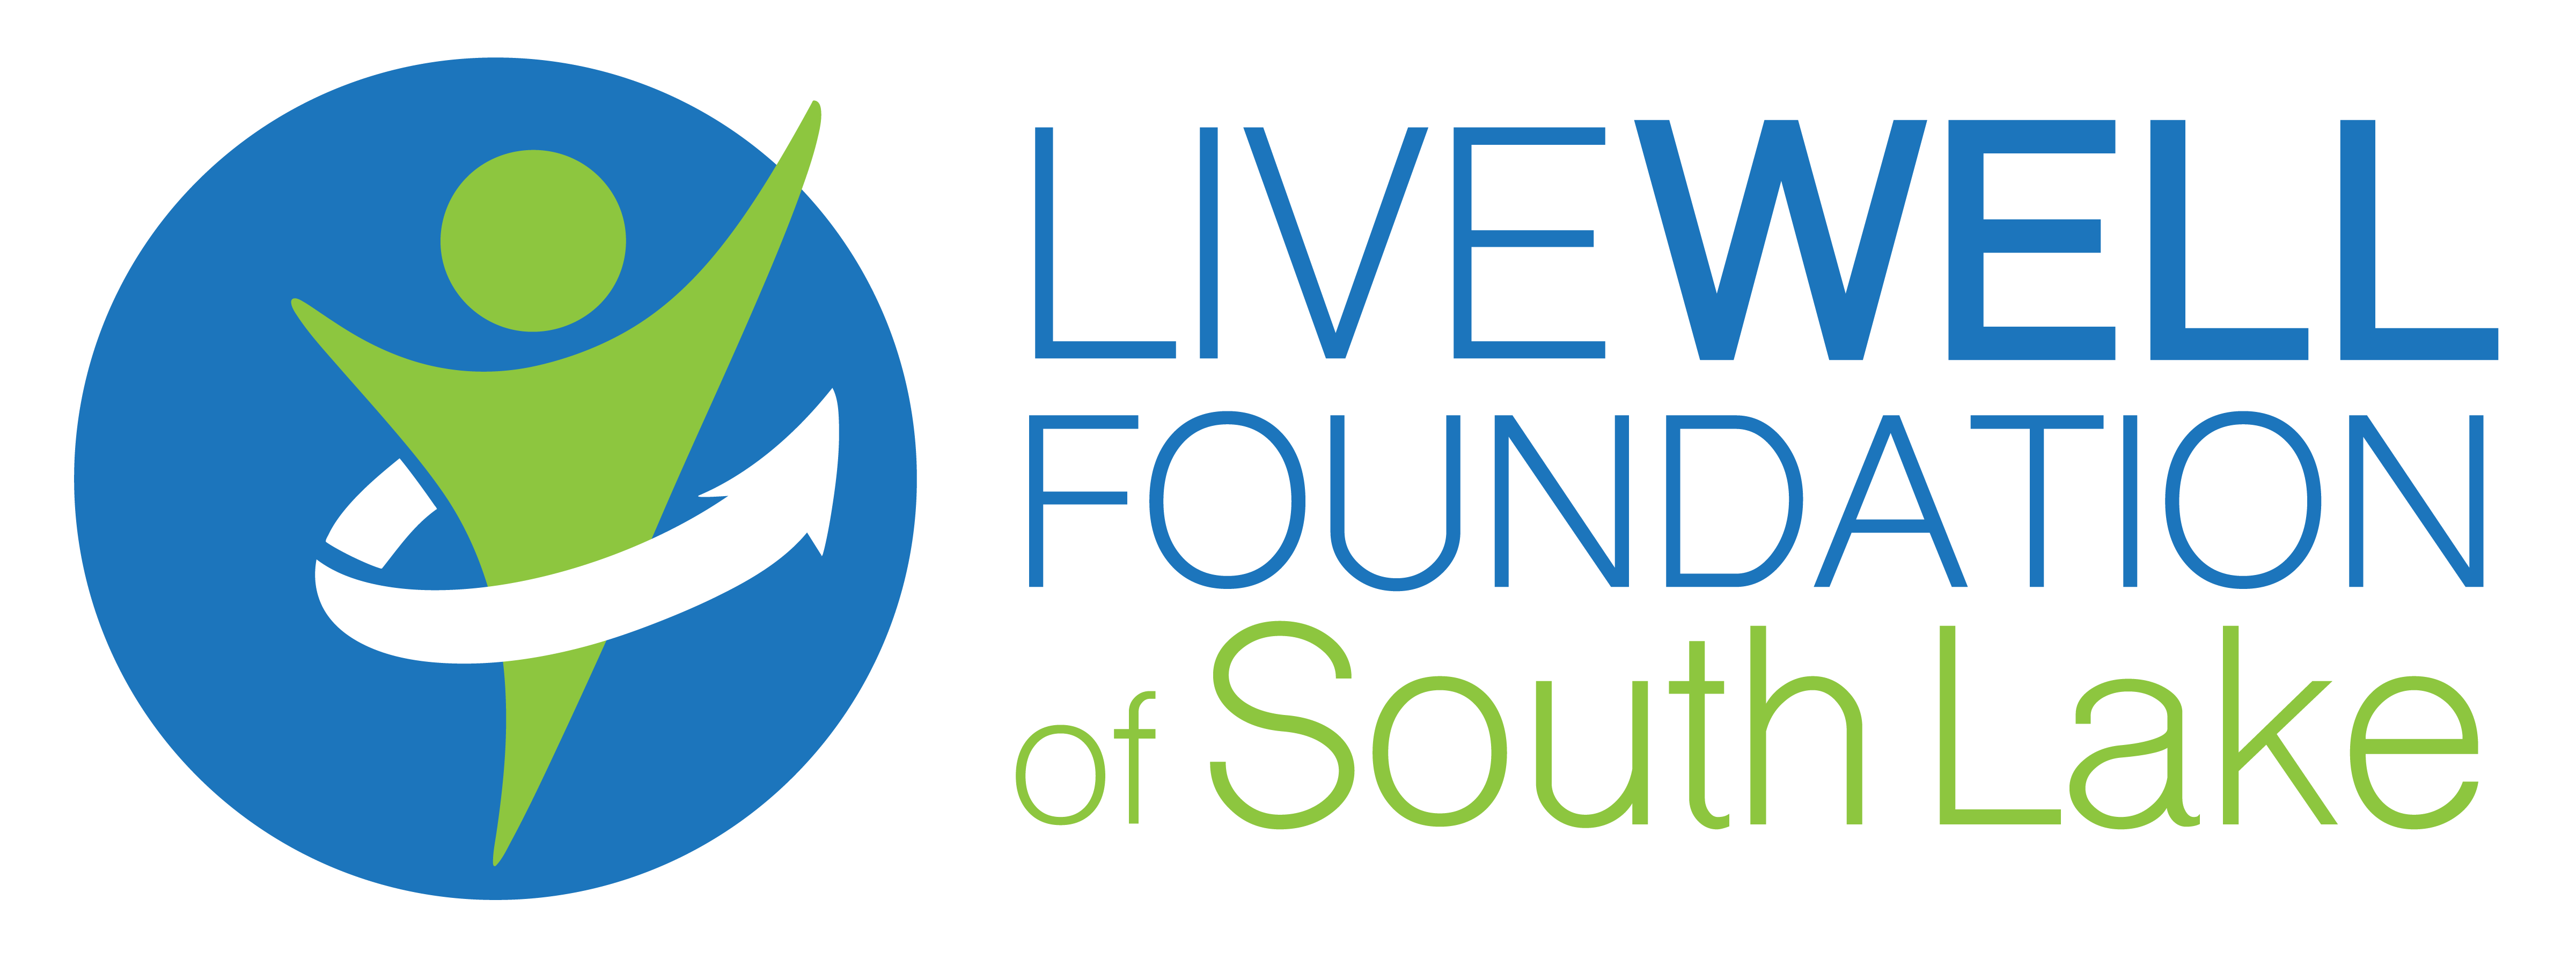 The Live Well Foundation